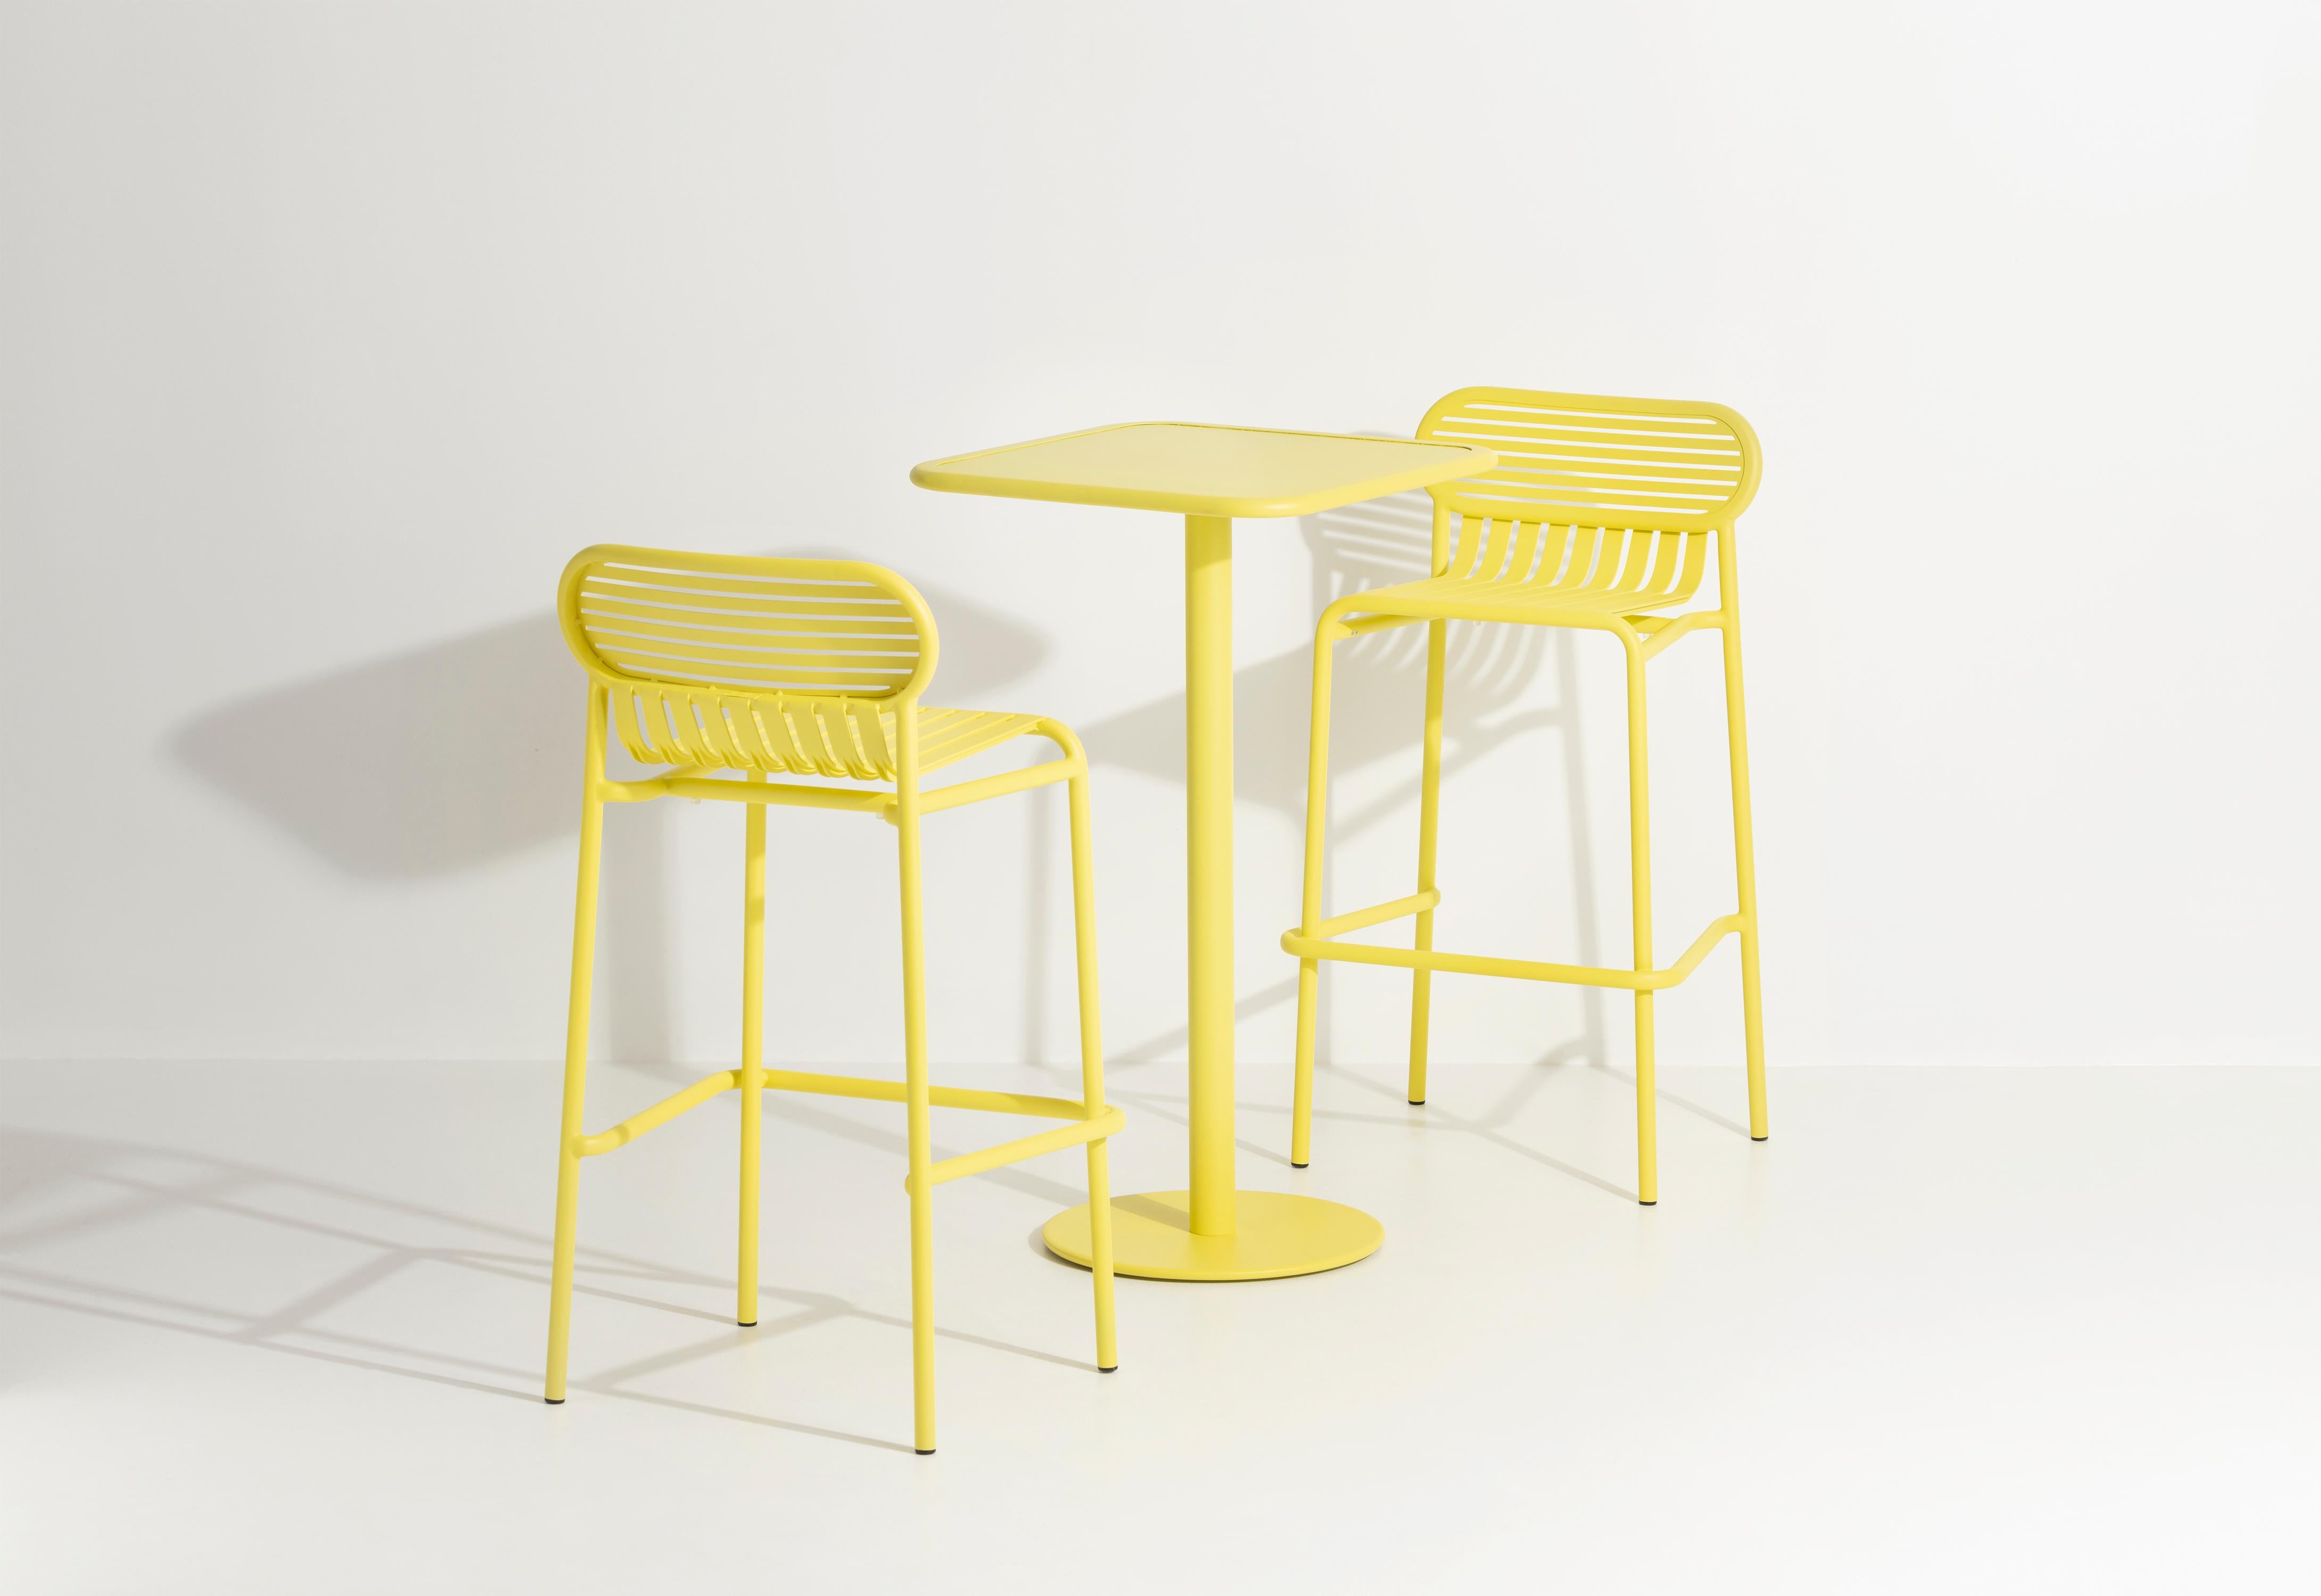 Contemporary Petite Friture Week-End Square High Table in Yellow Aluminium, 2017 For Sale